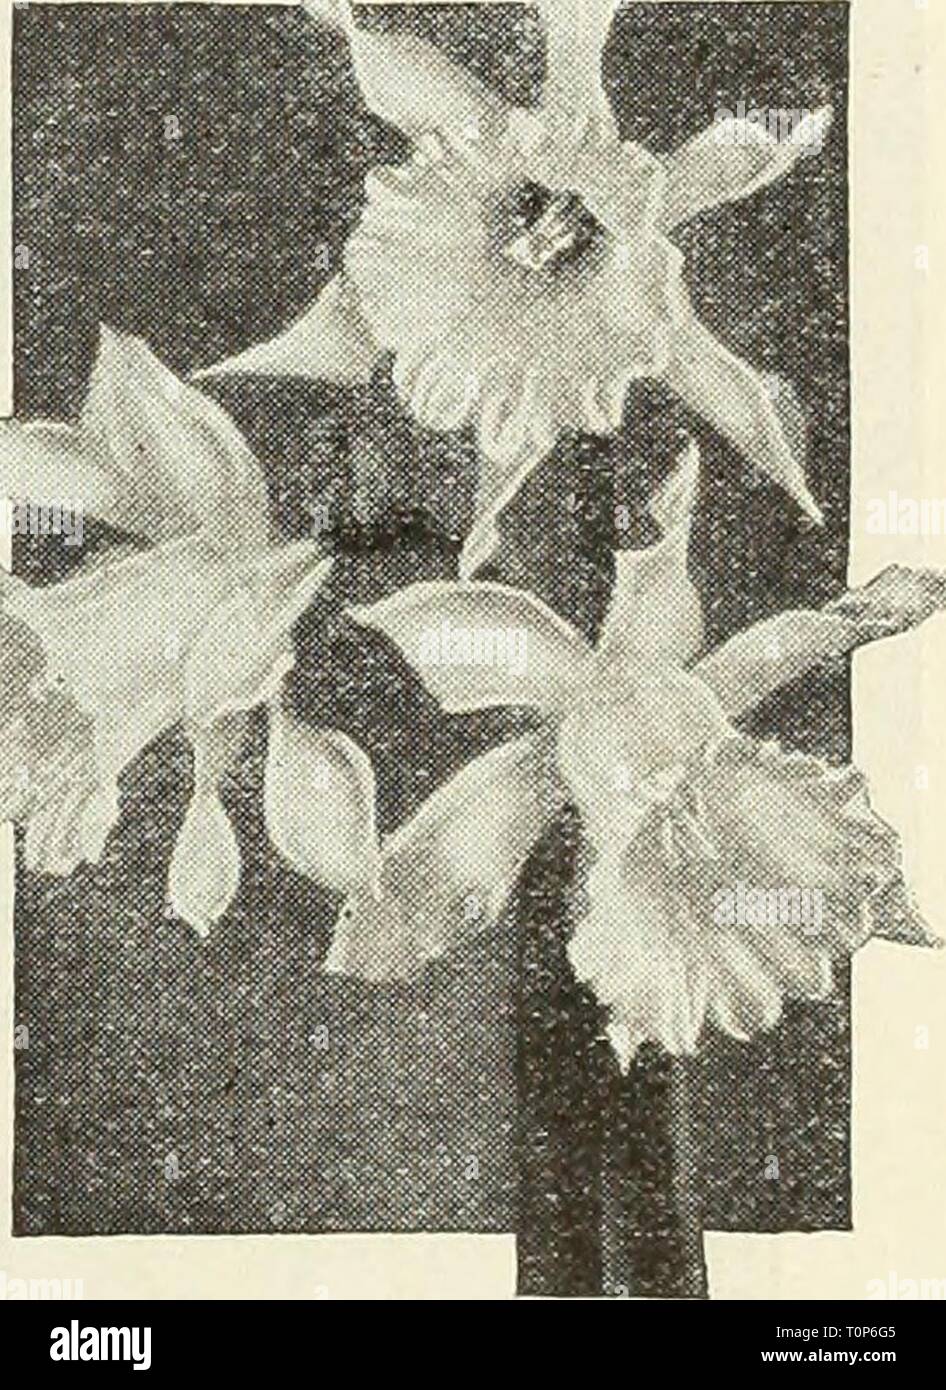 Dreer's bulbs  plants, shrubs, Dreer's bulbs : plants, shrubs, and seeds for fall planting  dreersbulbsplant1936henr Year: 1936  The graceful Triaii'lrus albua These lovely Narcissus are particularly, suited to plant- ing in the rock garden. Placed in groups of six or more bulbs, they add a charming effect to the spring display of the garden. In addition to the varieties described below all of the Jonquils but particularly the Single Sweet-Scented variety are exceptionally fine for rock garden planting. Bulbicodium conspicuus {The Hoop Petticoat Nar- cissus). This lovely little treasure grows  Stock Photo